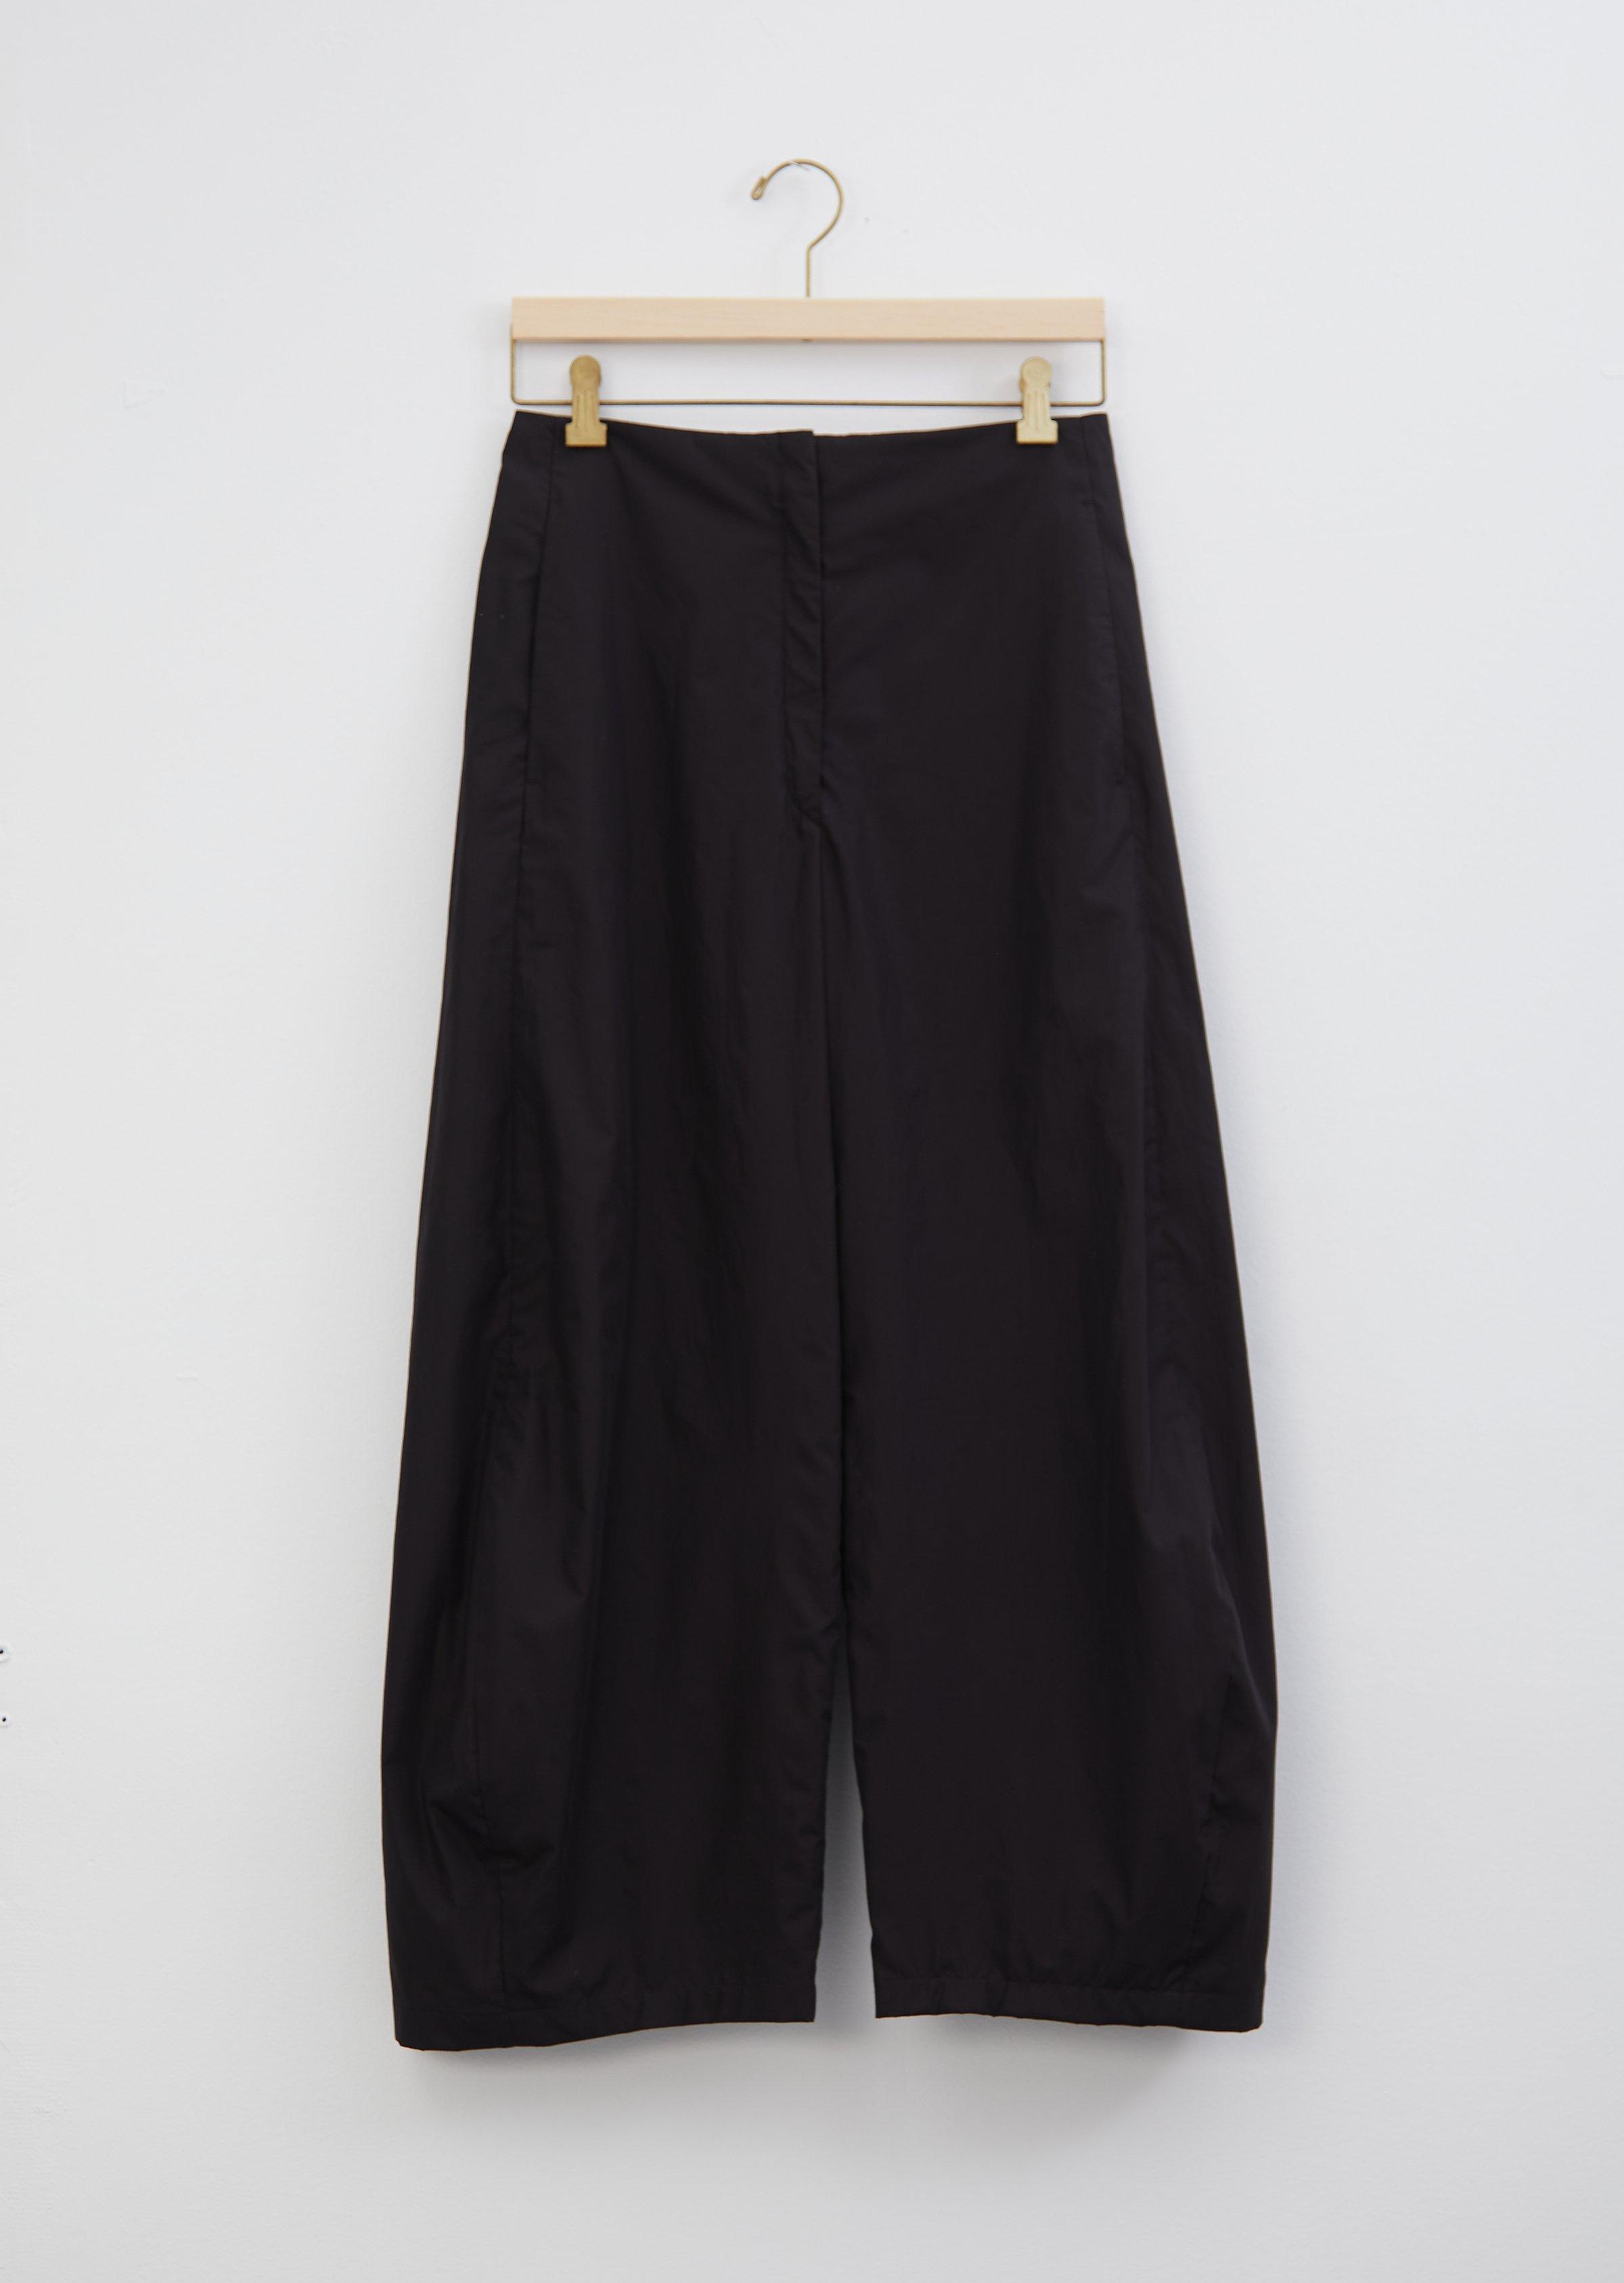 Lemaire Cotton Curved Pants in Black - Lyst